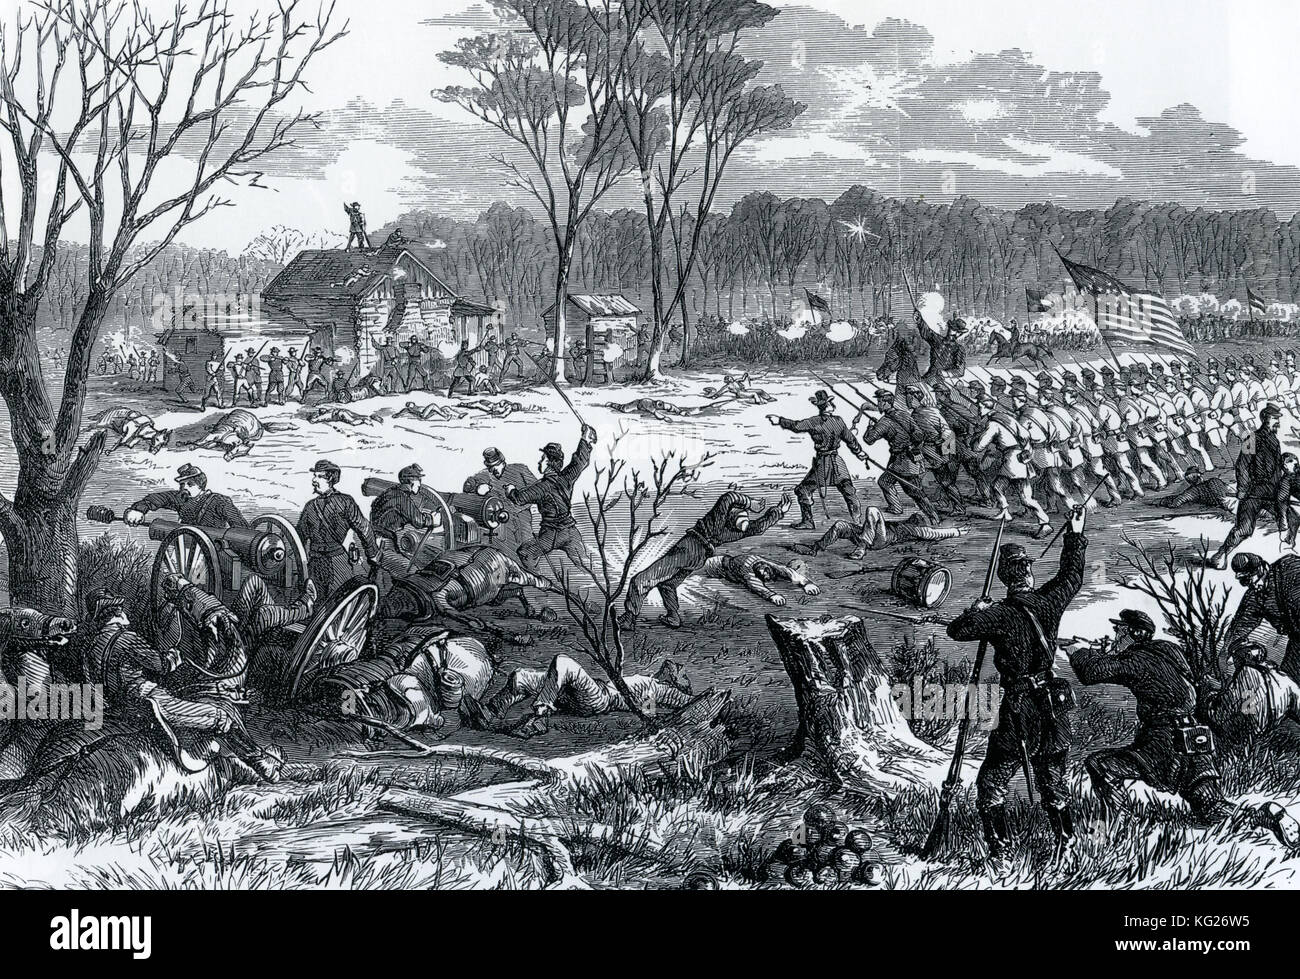 AMERICAN CIVIL WAR: Battle of Shiloh in south west tennessee on the second day 7 April 1862. Union troops at right advance with considerable artistic licence  as captured guns at left are turned against the Confederates defenders. Stock Photo